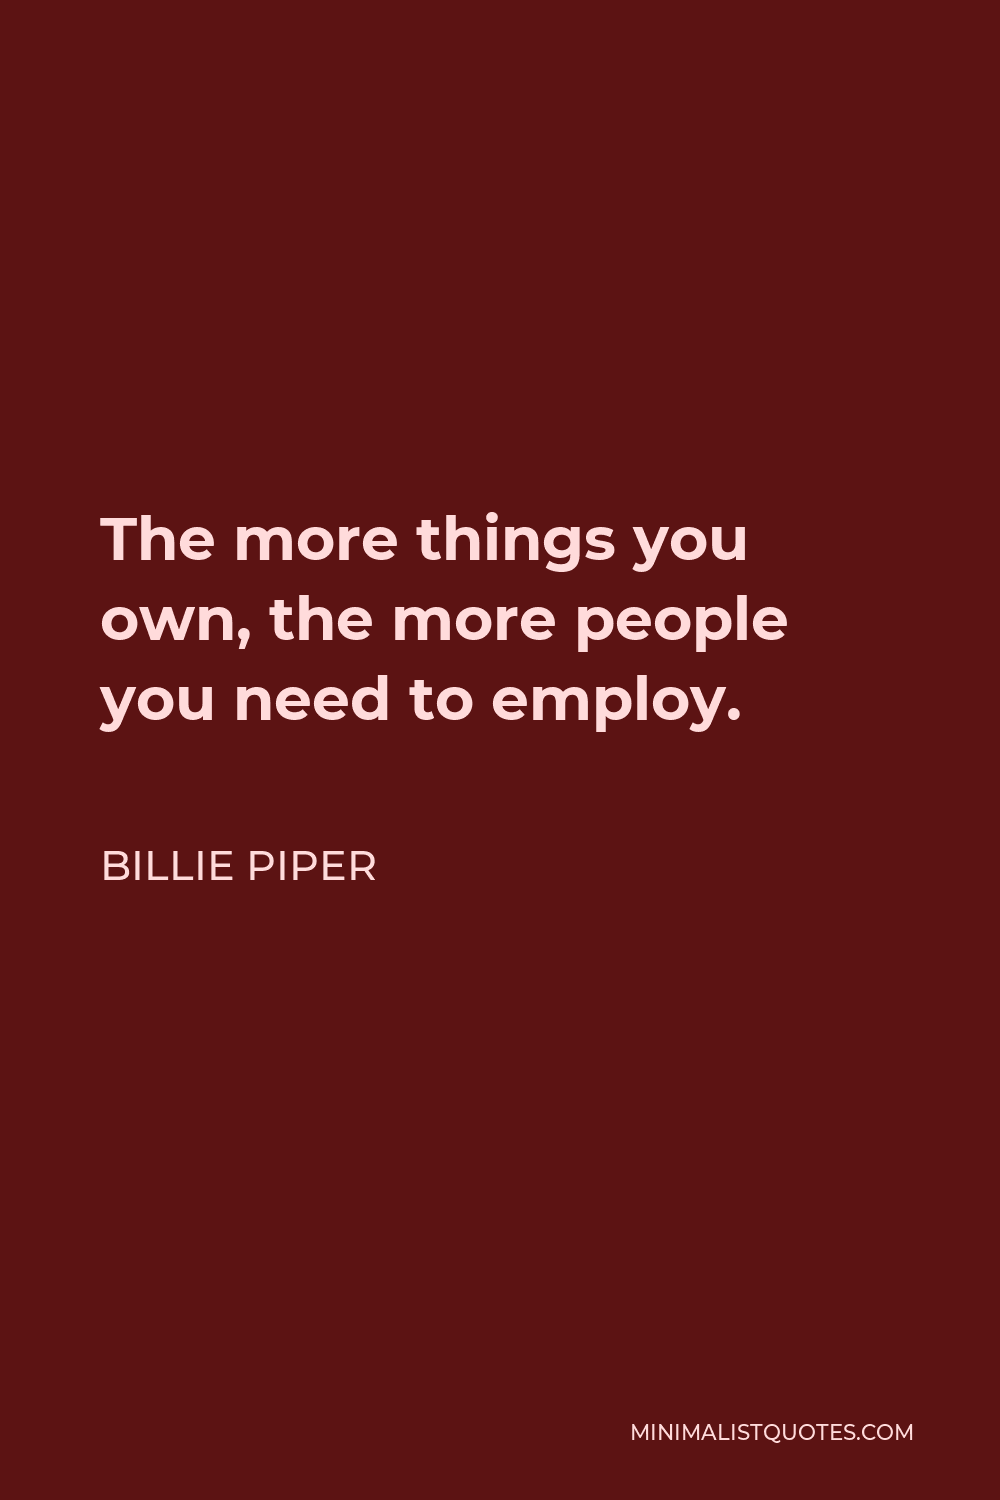 Billie Piper Quote - The more things you own, the more people you need to employ.